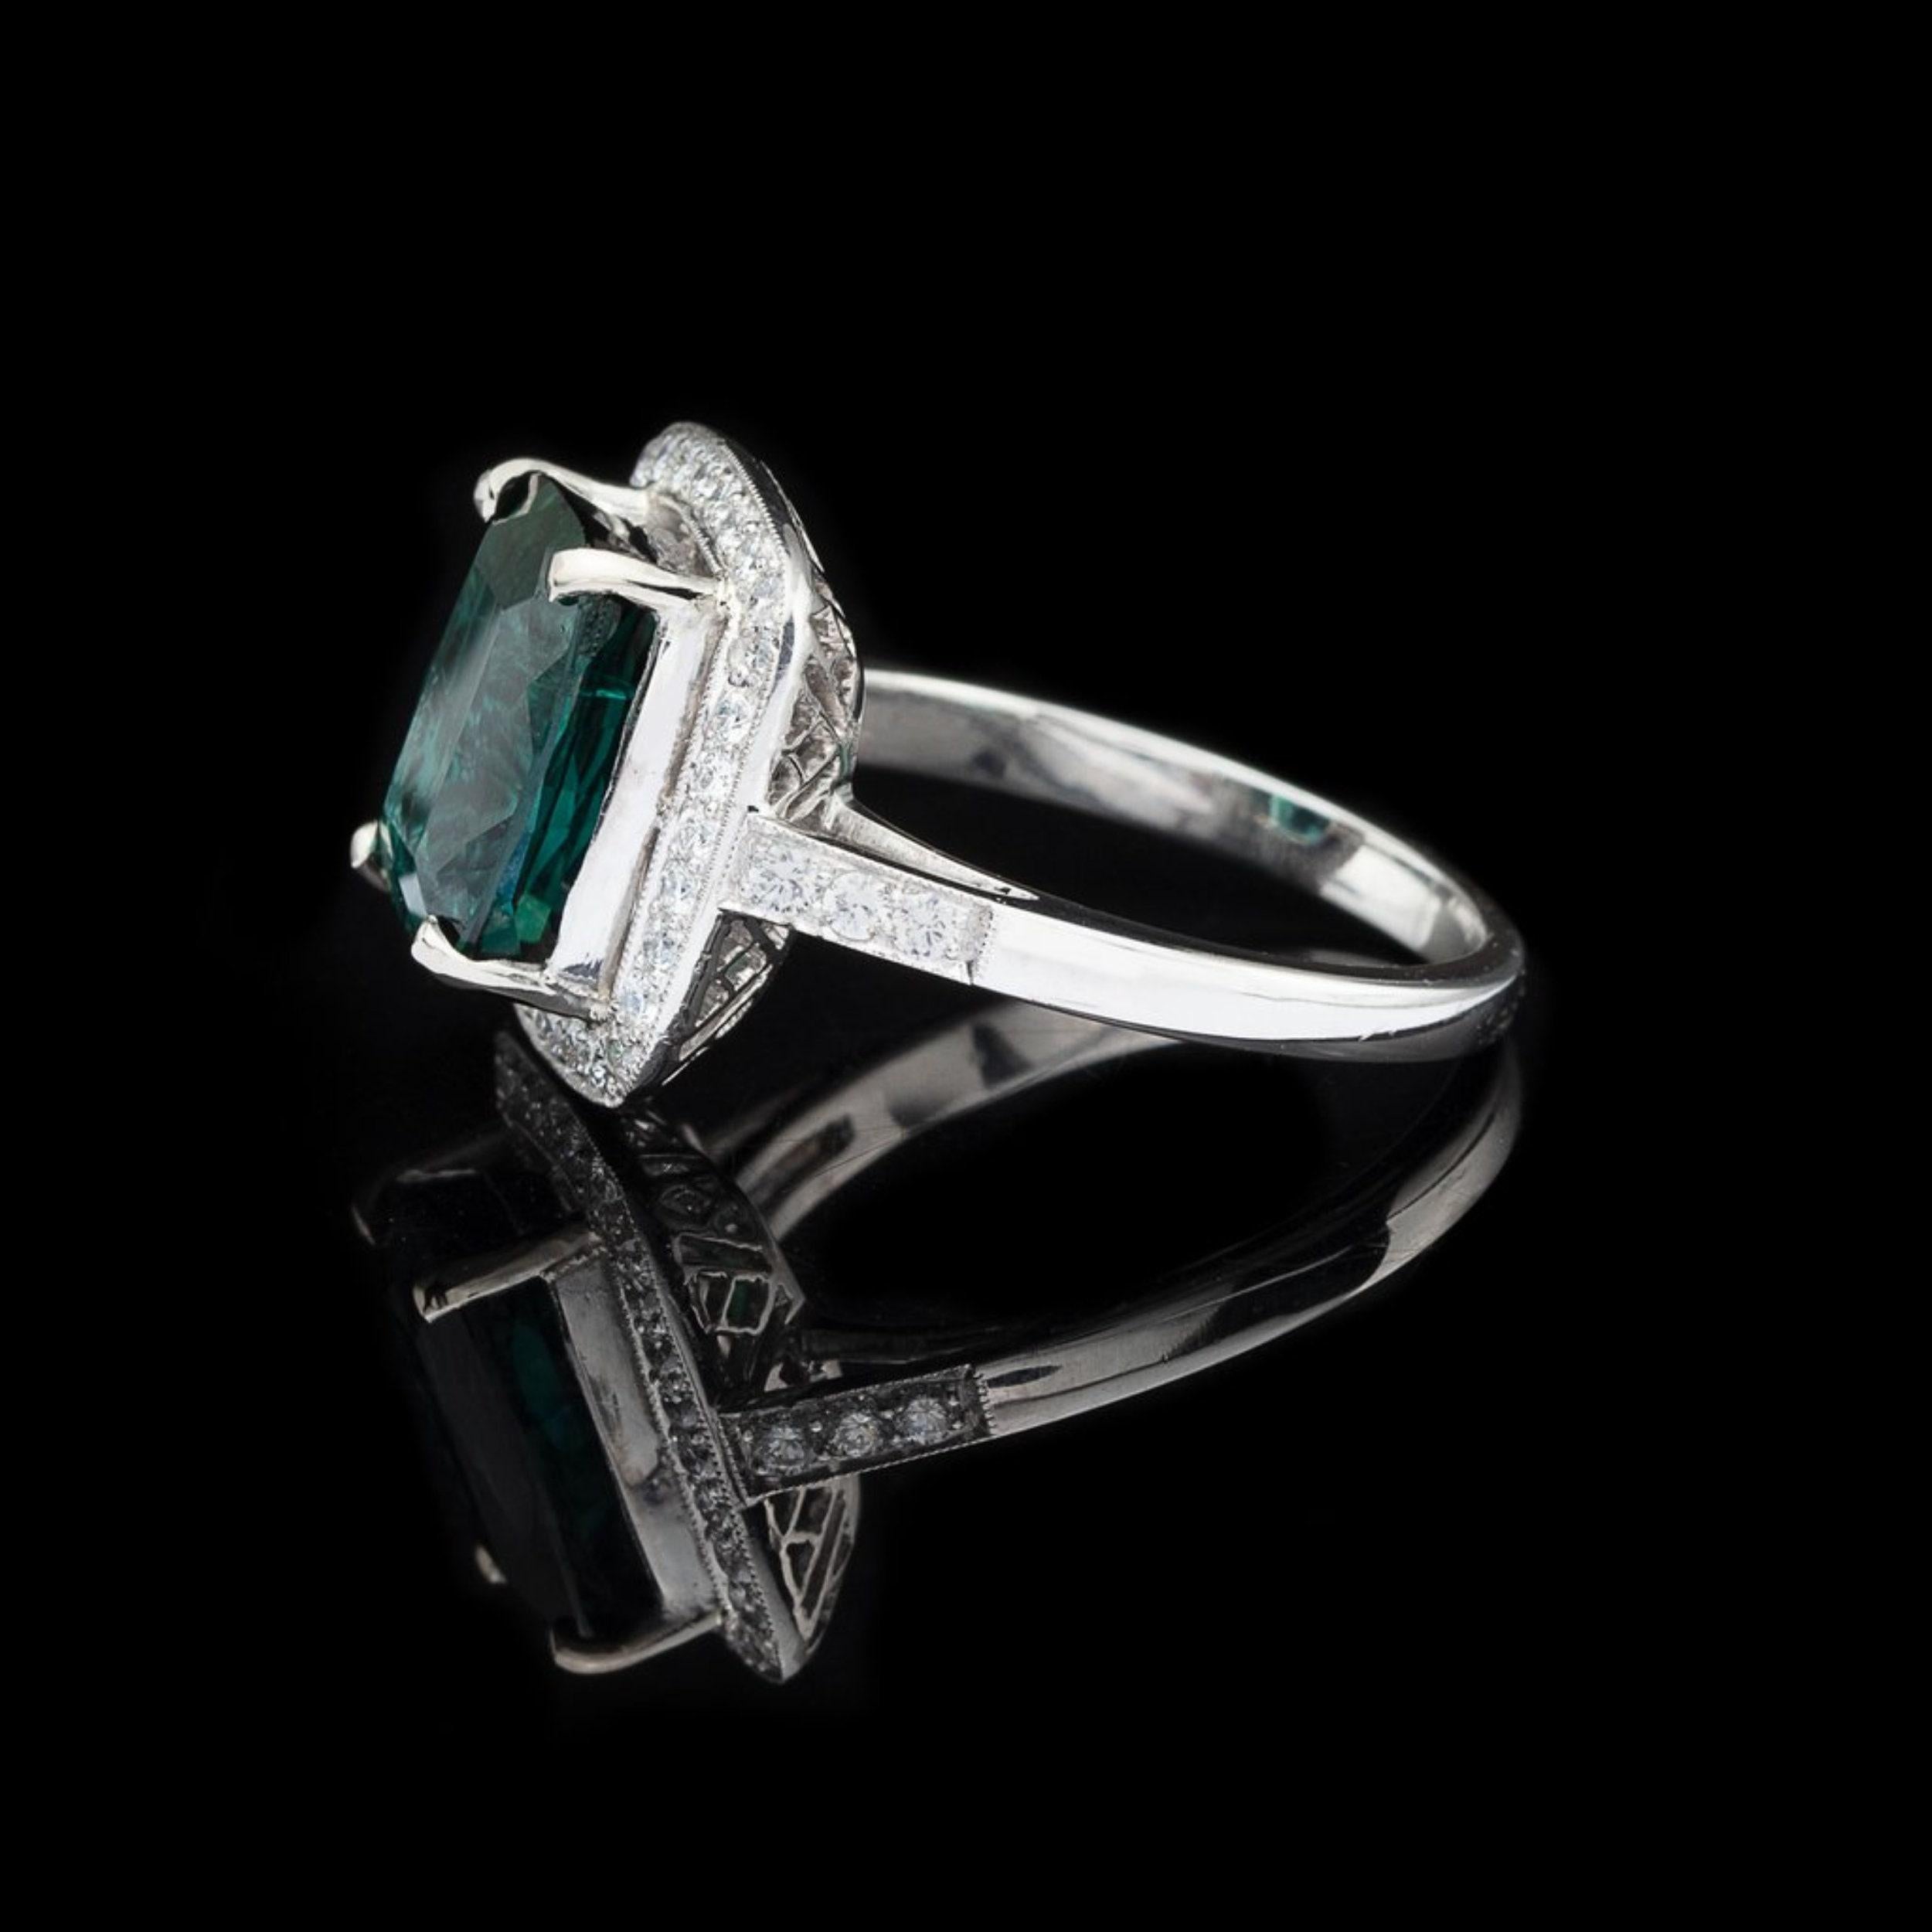 For Sale:  4 Carat Cushion Cut Emerald Engagement Ring Vintage Emerald White Gold Ring 2